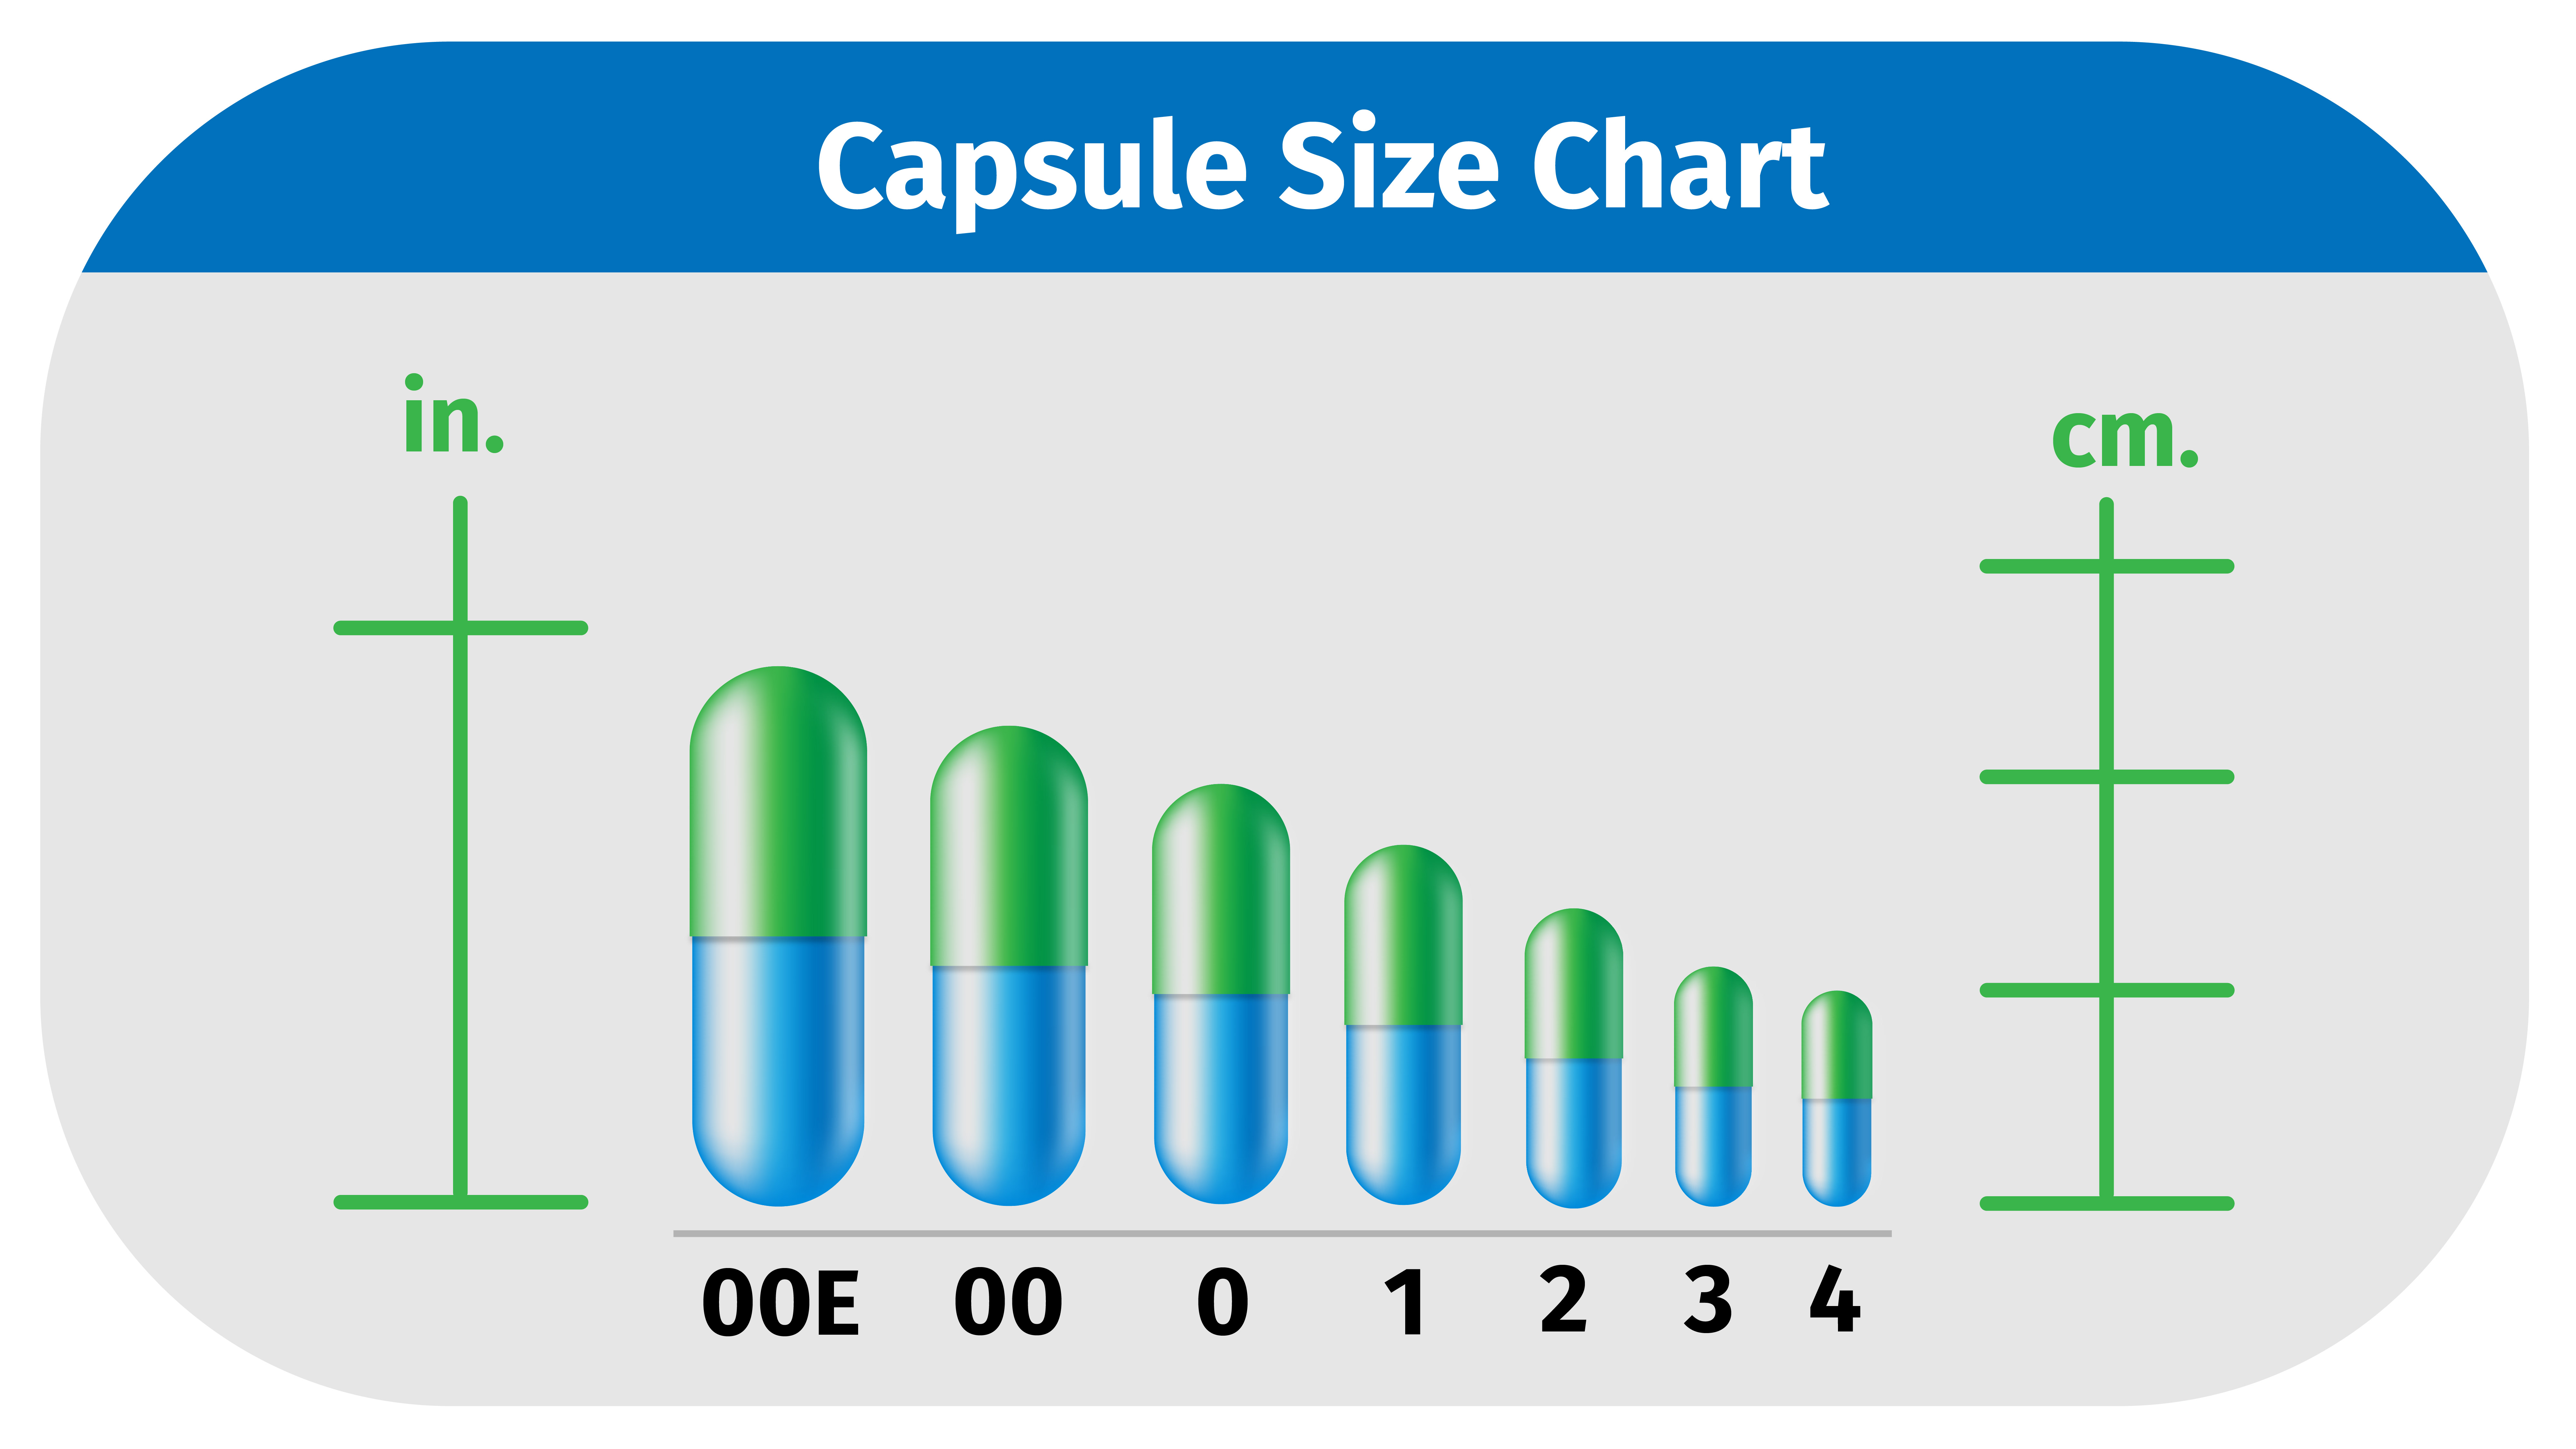 A chart showing various capsule sizes